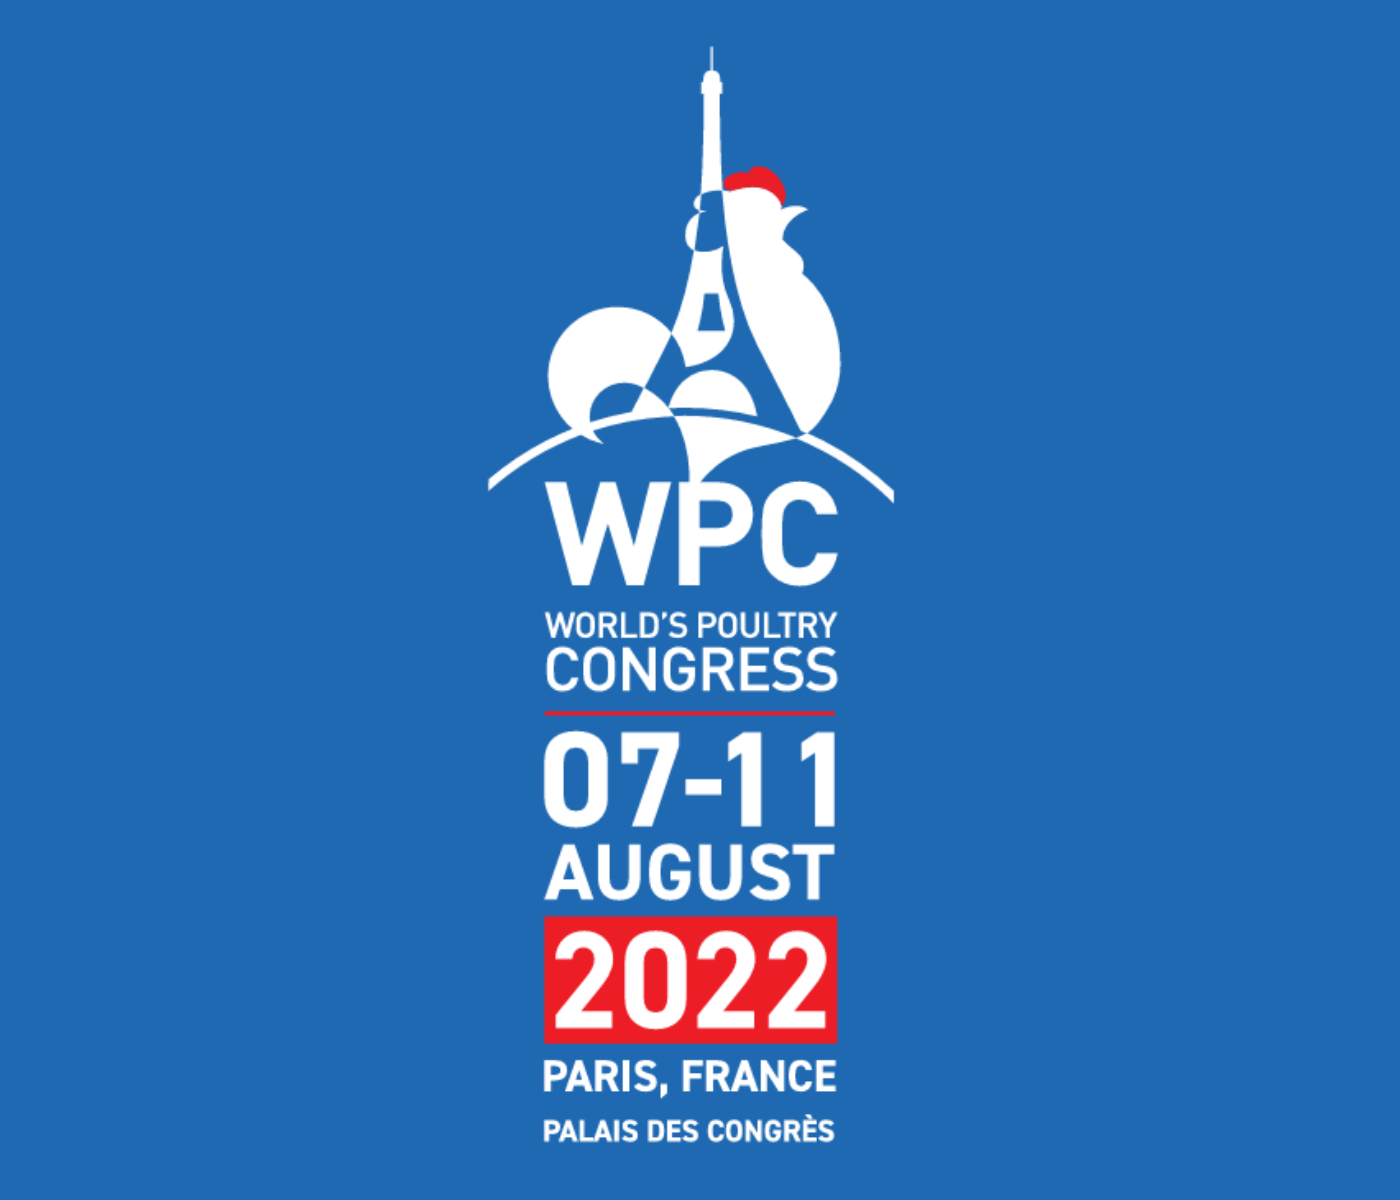 An innovative and custom-made program​ at the WPC 2022